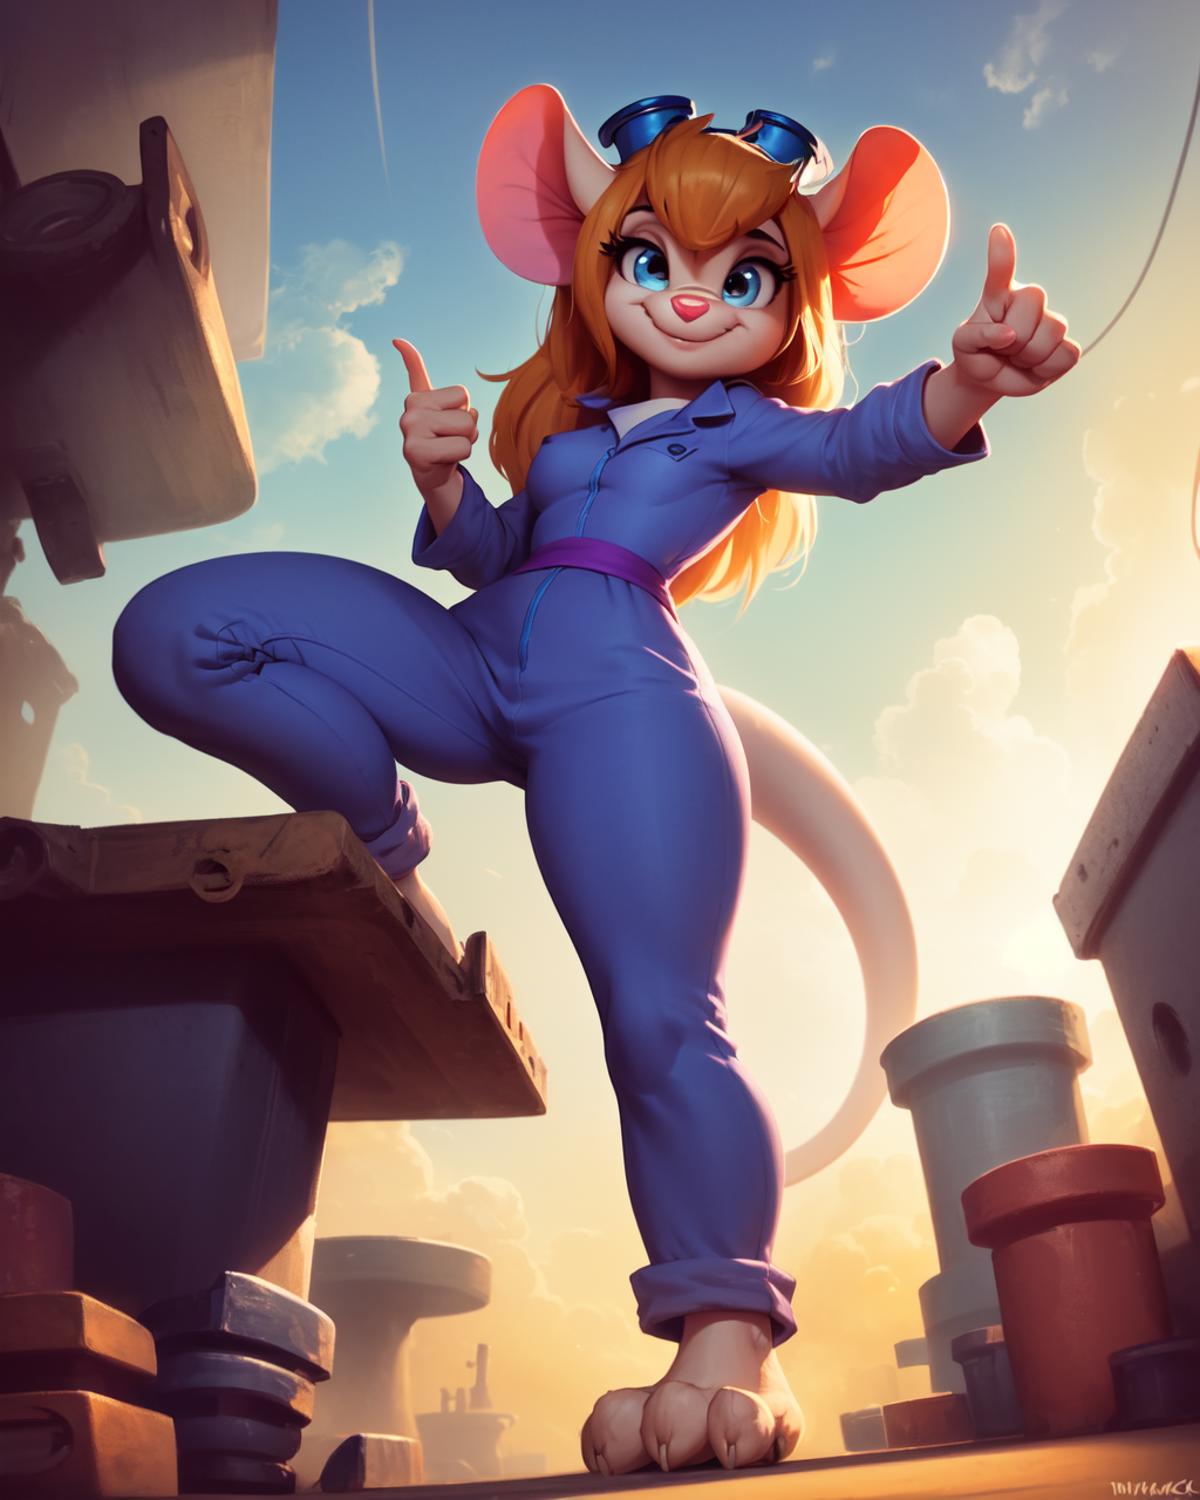 Gadget Hackwrench (Rescue Rangers) image by FinalEclipse